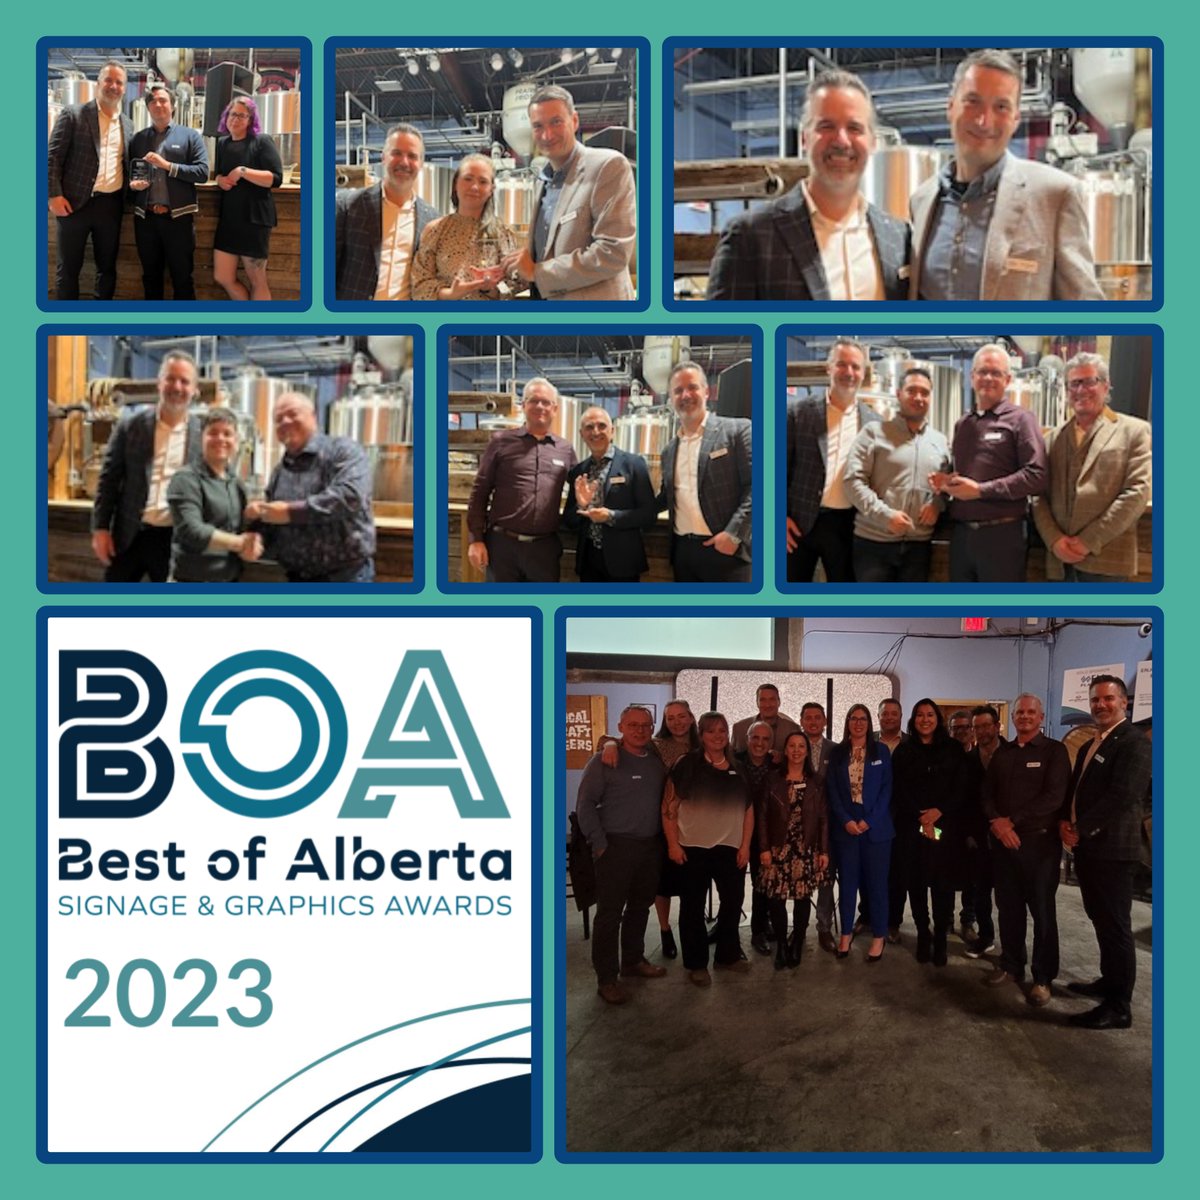 🤩
Reminiscing about this fun night! #ThrowbackThursday

#boasigns2023 #winners #members #theycreatecoolstuff #signs #wraps #signshops #print #signage #signmakers #printshops #carwraps #autowraps #AssociationEvents #MembersMatter